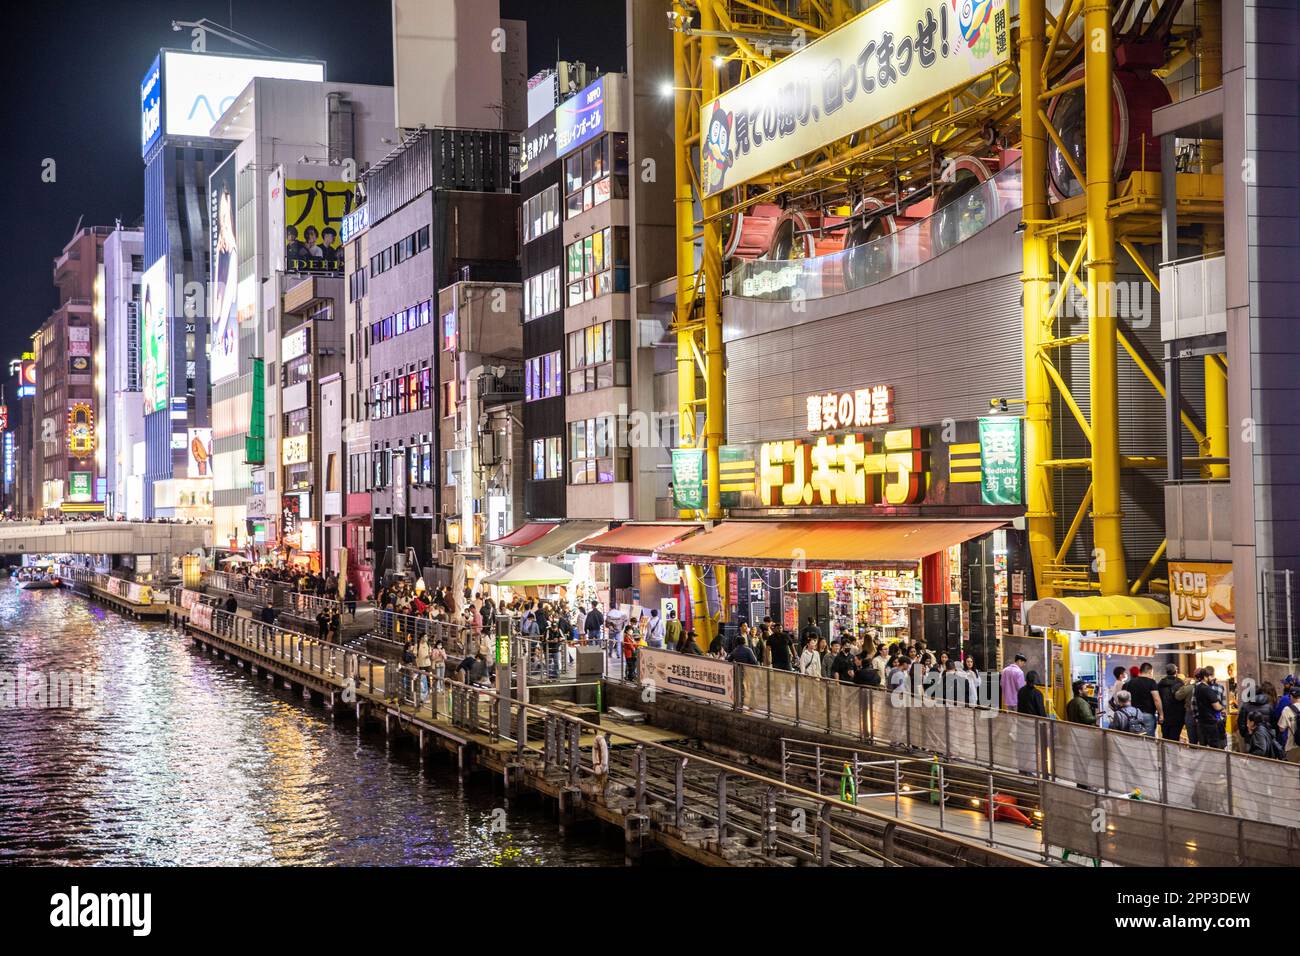 Osaka Japan April 2023, Dotonbori River canal at night time with neon lights and crowds gathering for dinner and entertainment, street scene,Japan Stock Photo